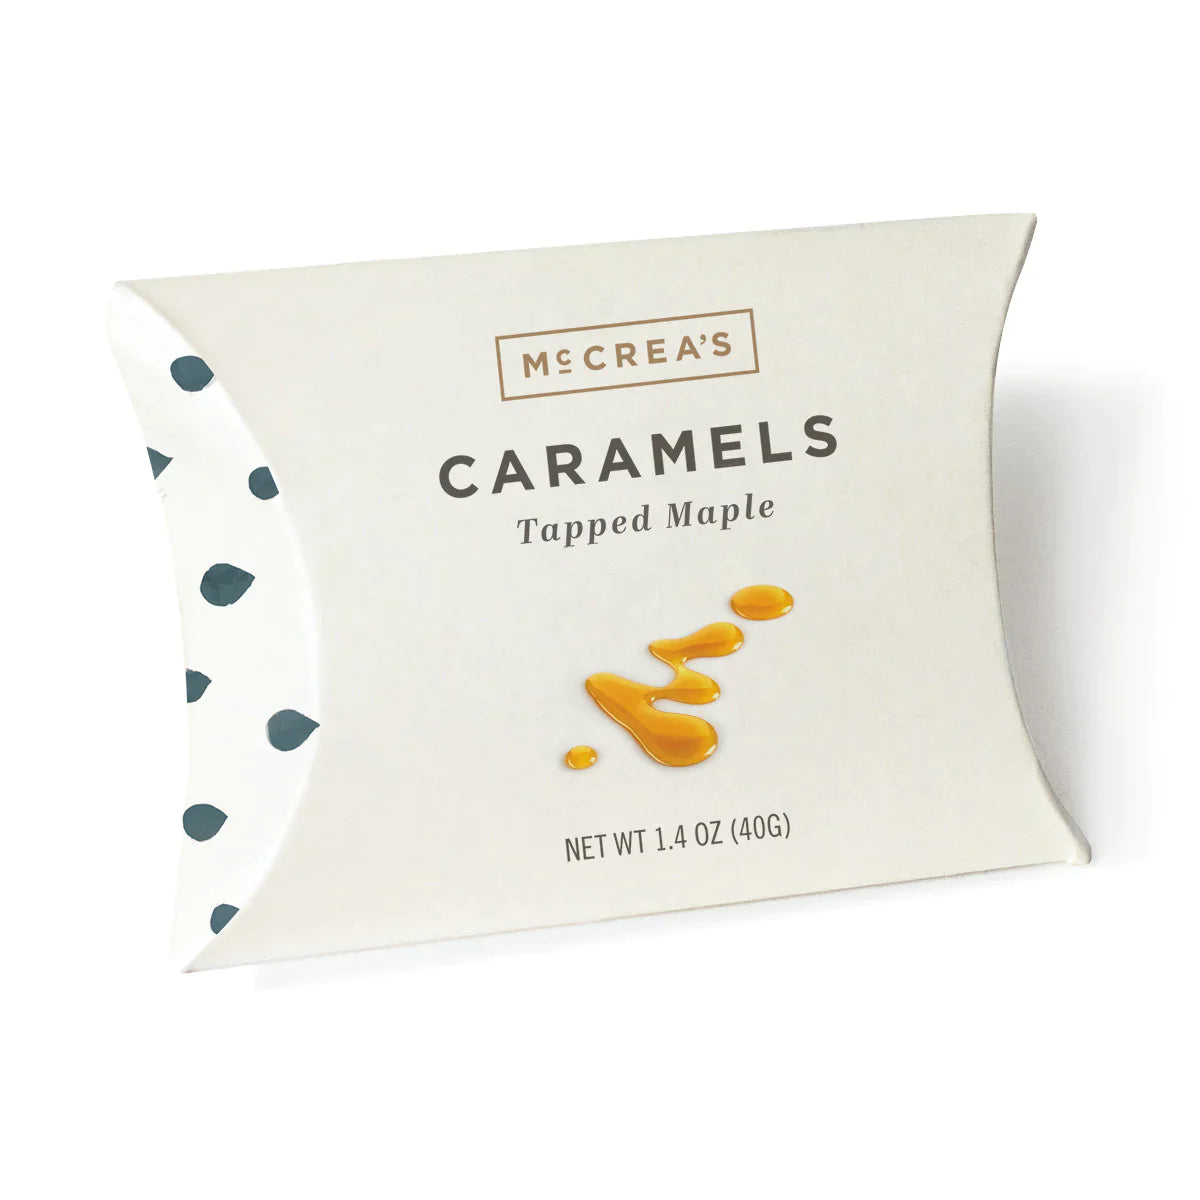 Maple Caramel Pillow Box packaging on white background.